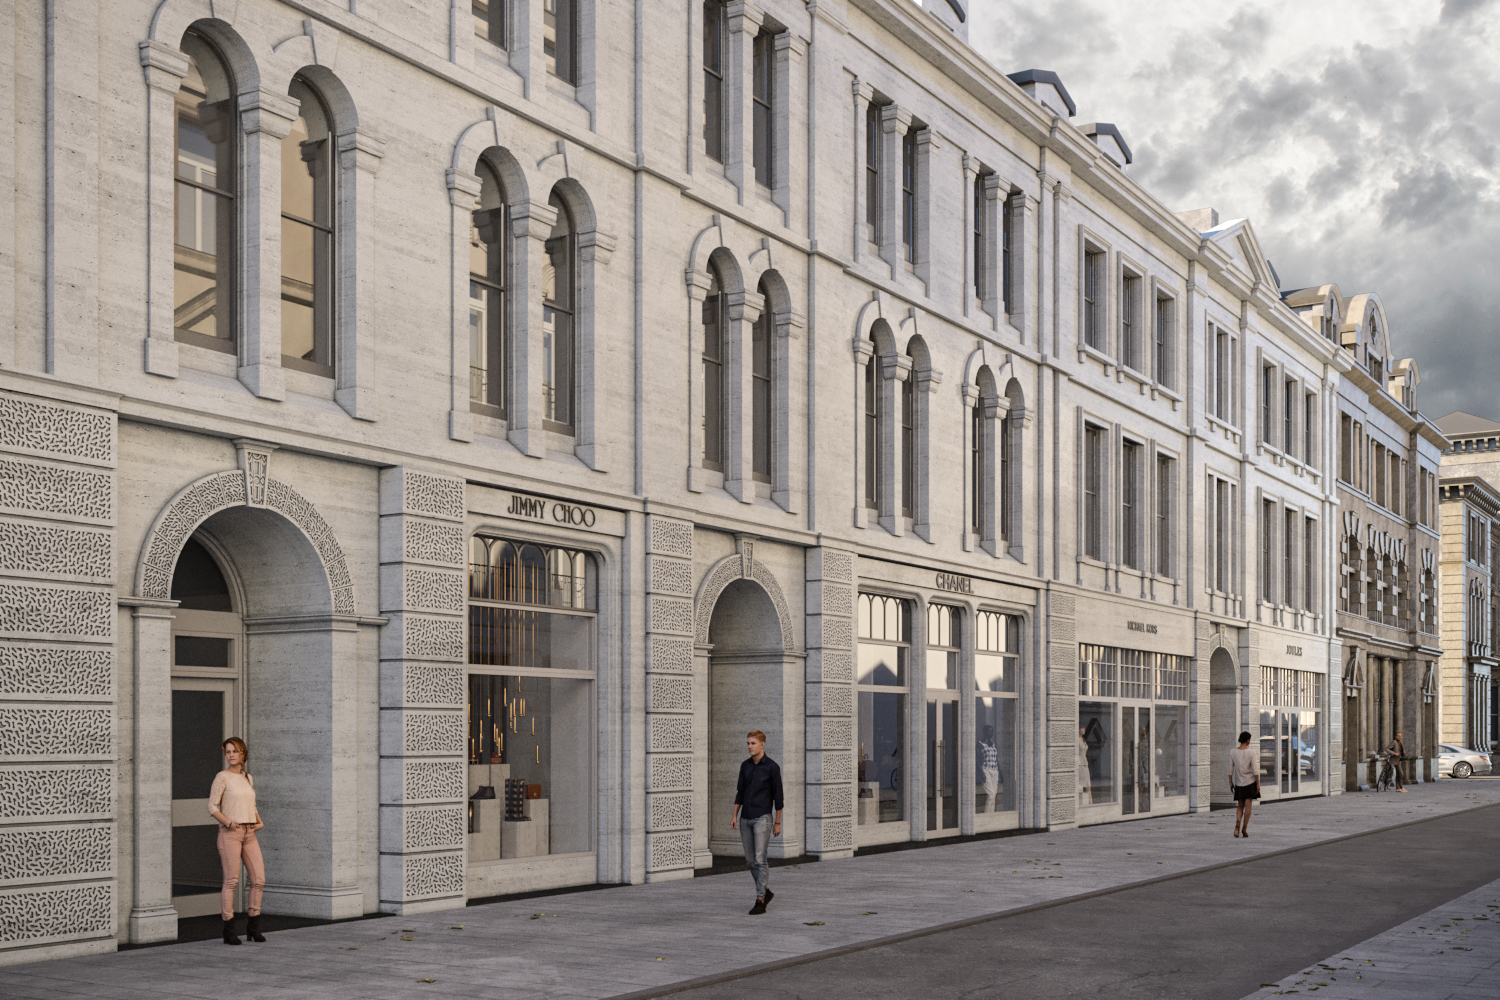 £12.5m retail and residential project planned for Inverness city centre